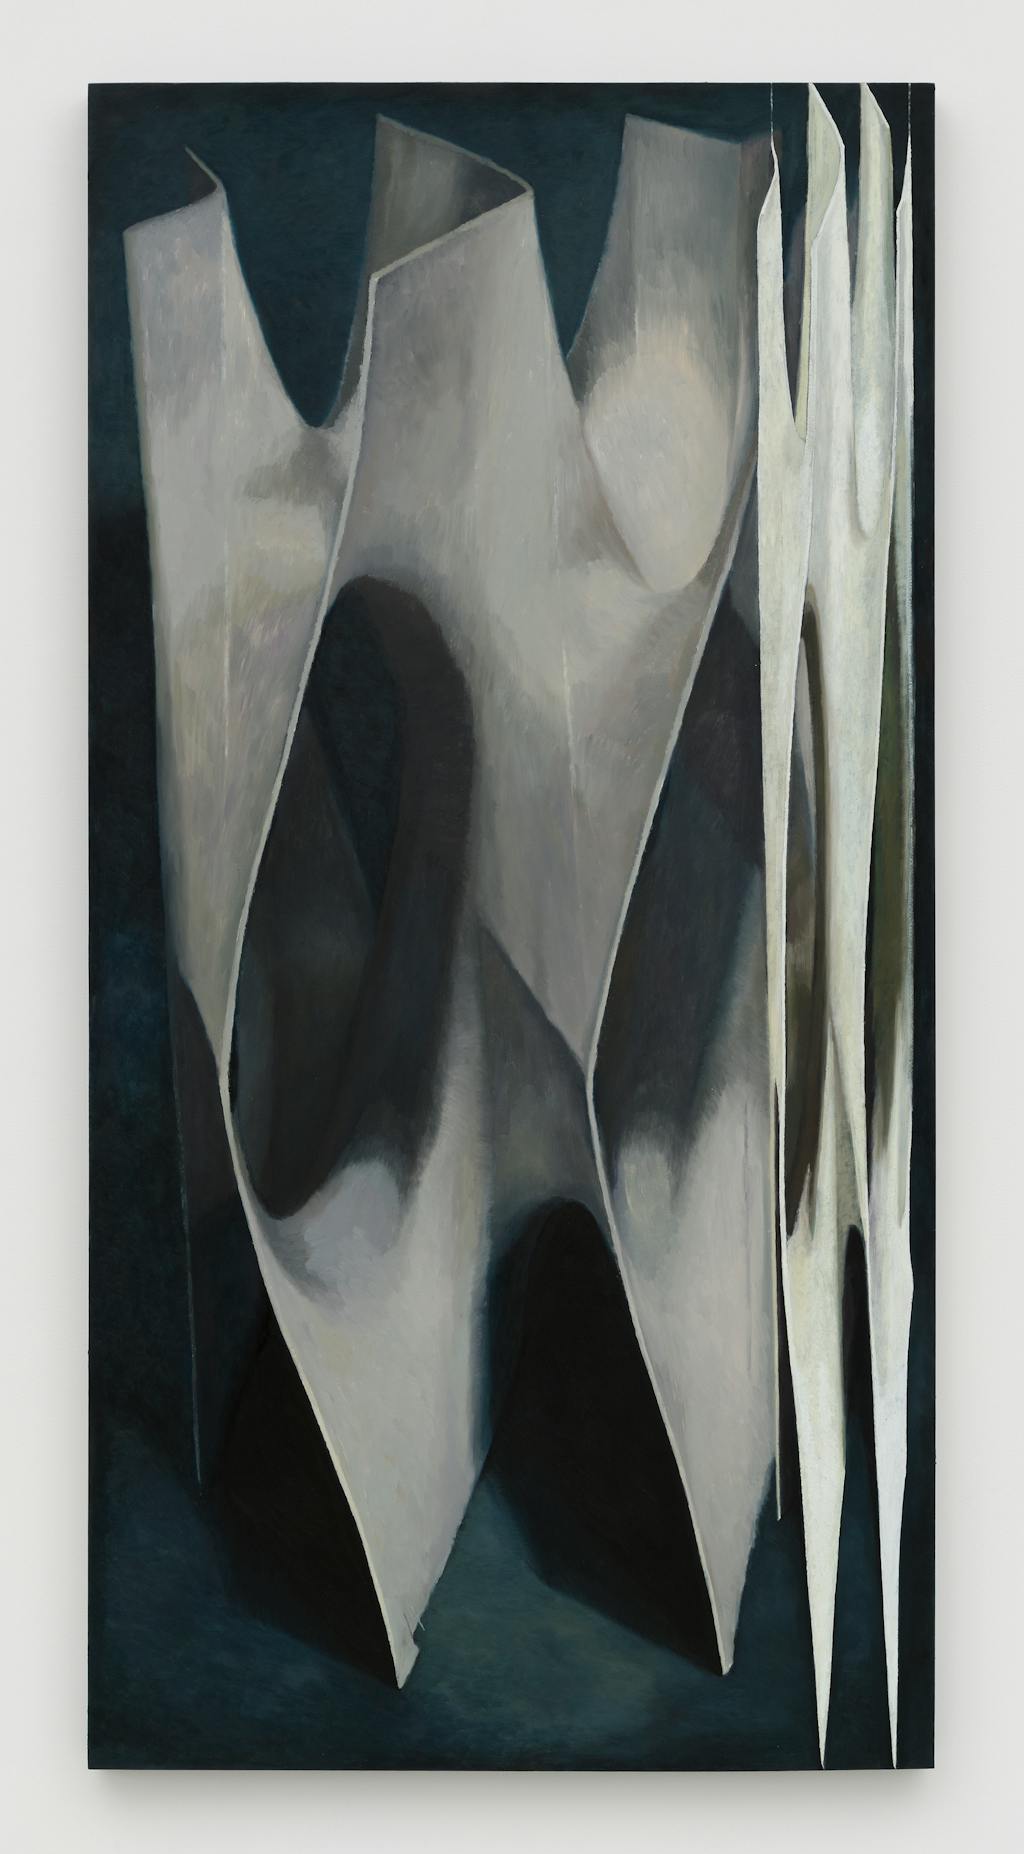 Stella Zhong
Minimal Surface 001(Pneuhaus Original), 2022
Oil on panel
60 x 30 x 1 5/8 in (152.4 x 76.2 x 4.1 cm)
Courtesy of the artist and Chapter NY, New York - © Paris Internationale